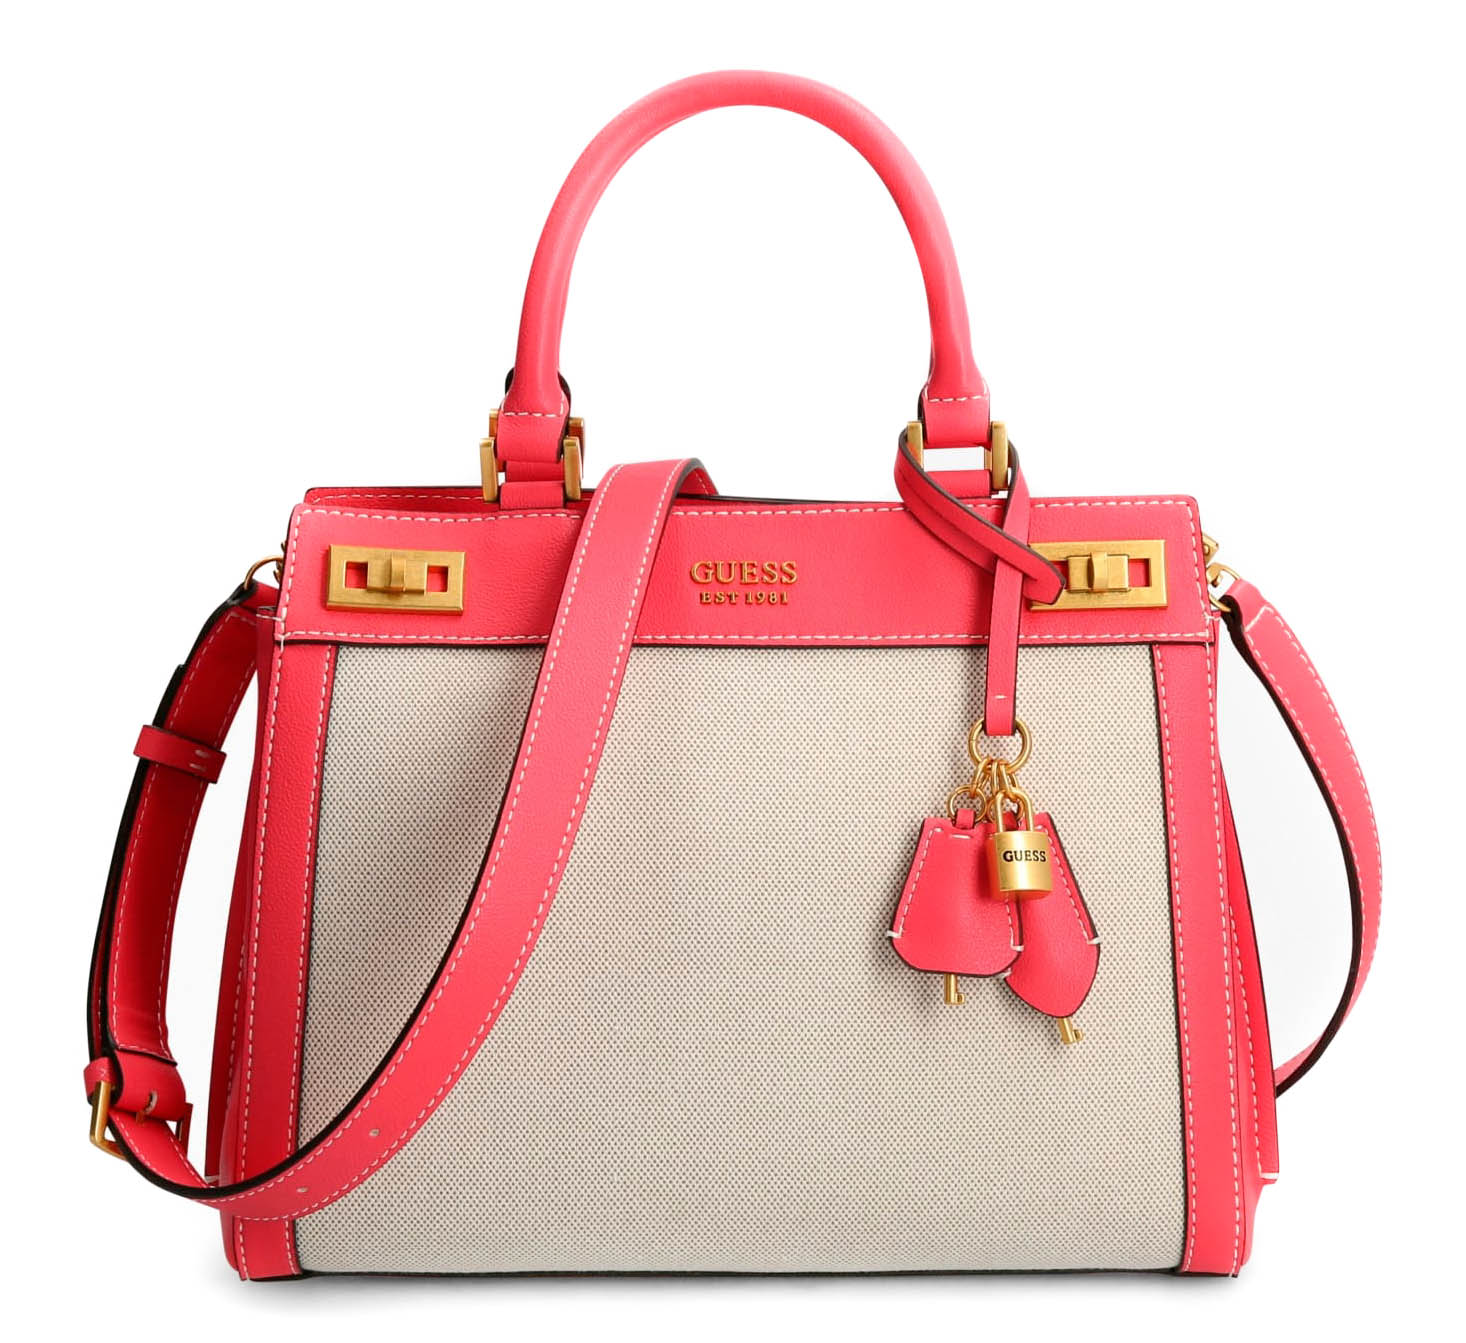 GUESS cross body bag Katey Luxury Satchel Natural / Camelia, Buy bags,  purses & accessories online